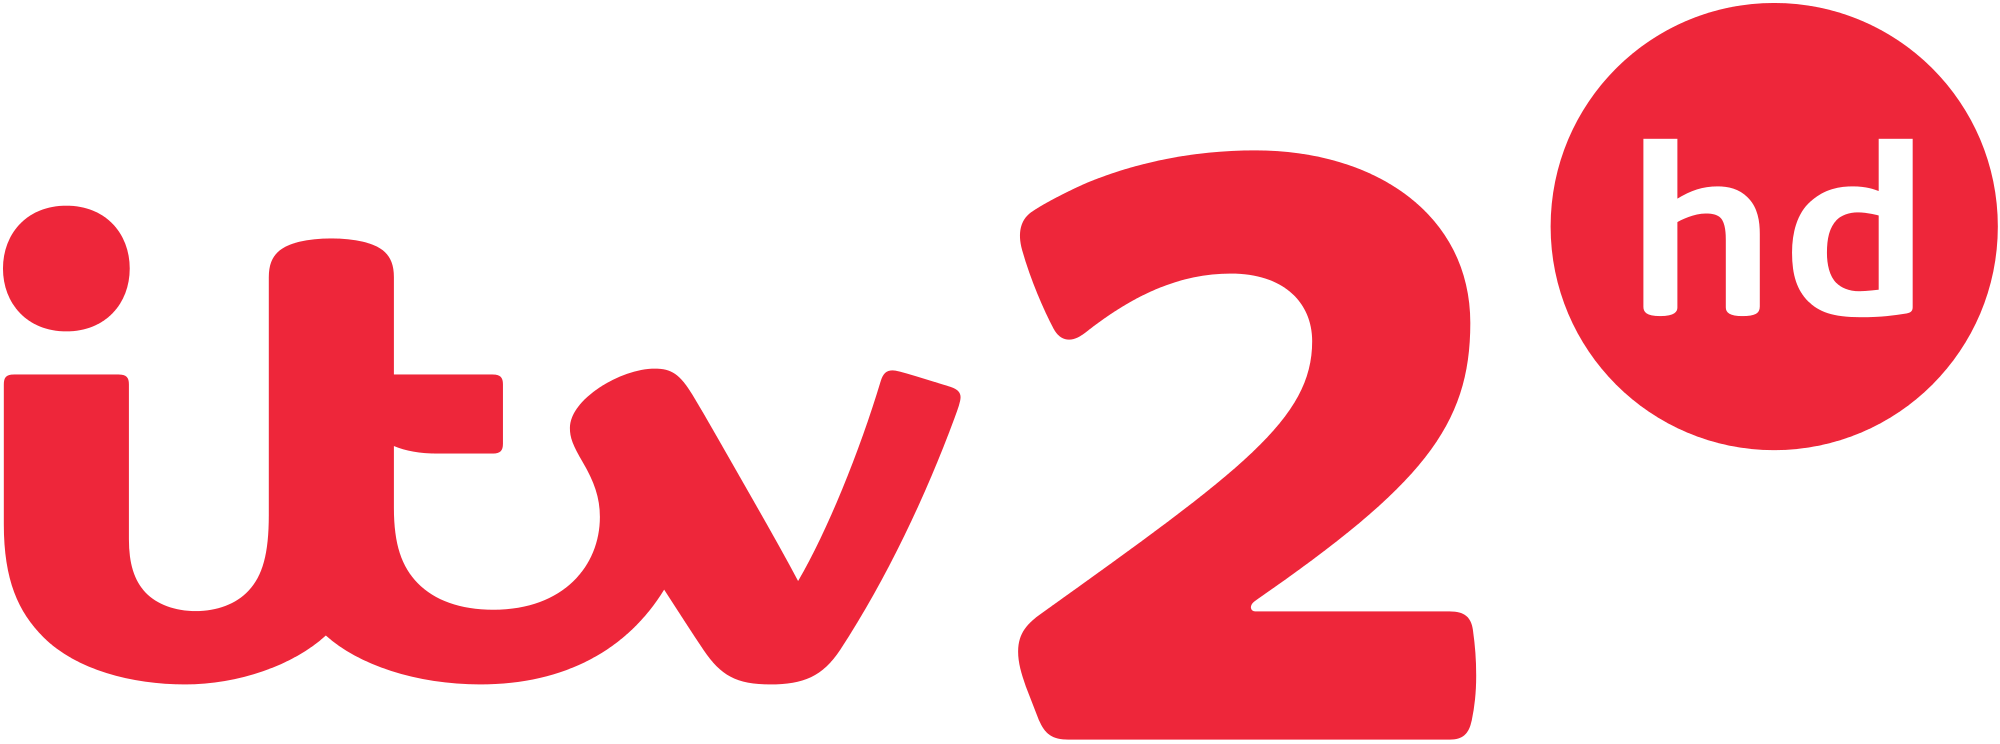 ITV2 HD logo 2013 svg.png, Itv2 Hd PNG - Free PNG